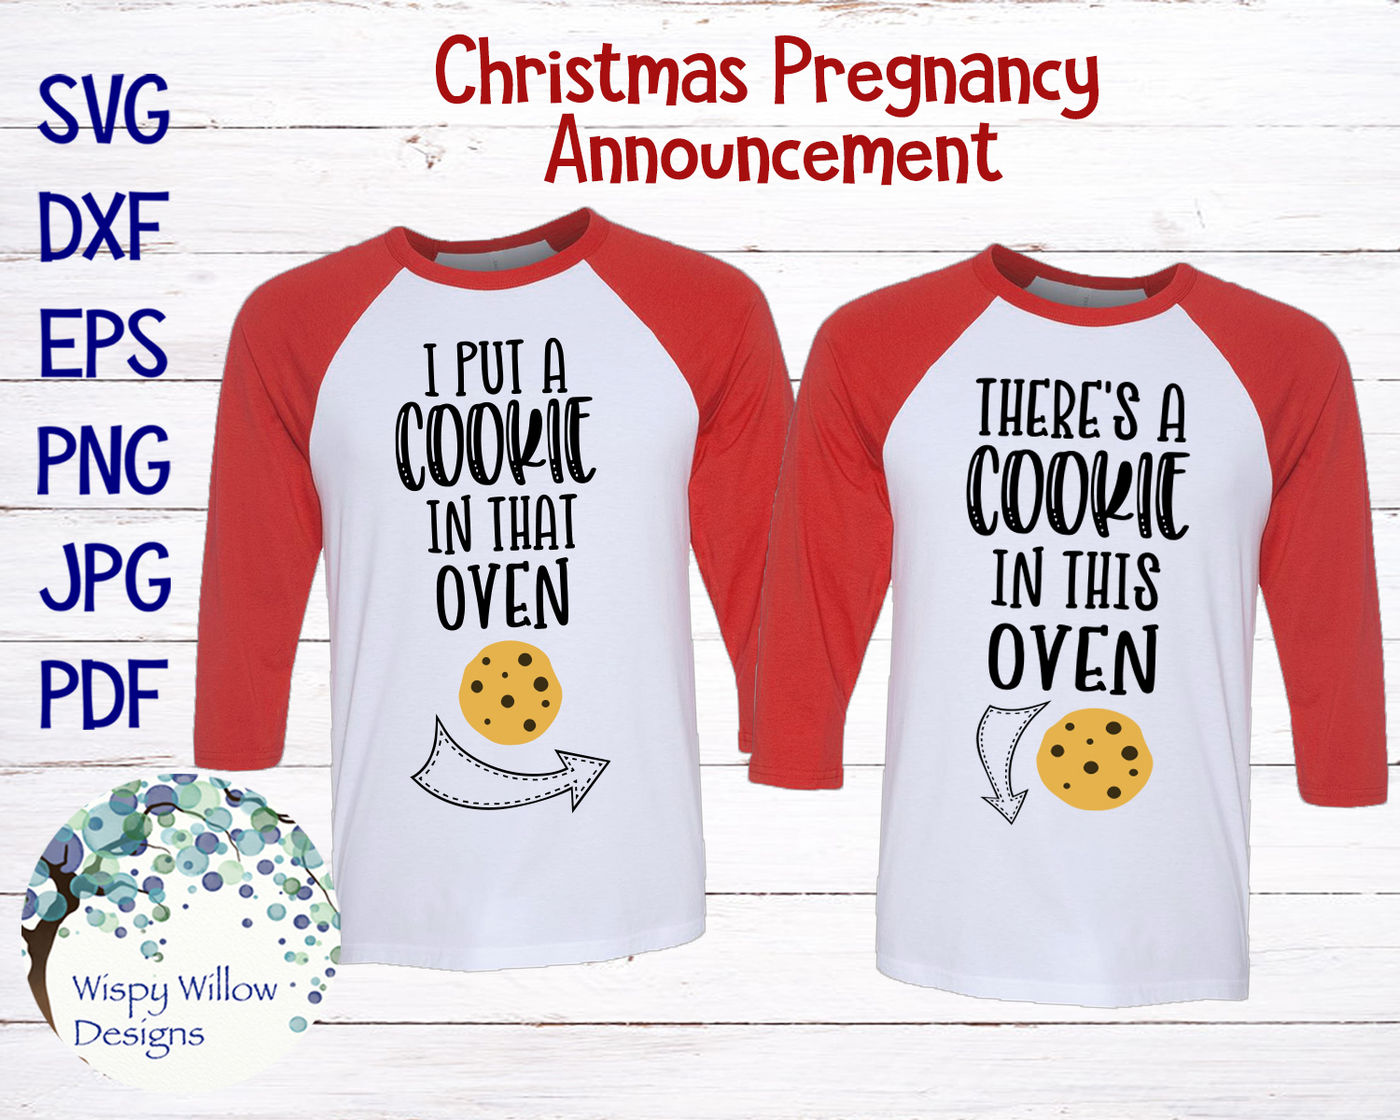 Download Iwitness News Breaking News Svg News Christmas Baby Announcement 2020